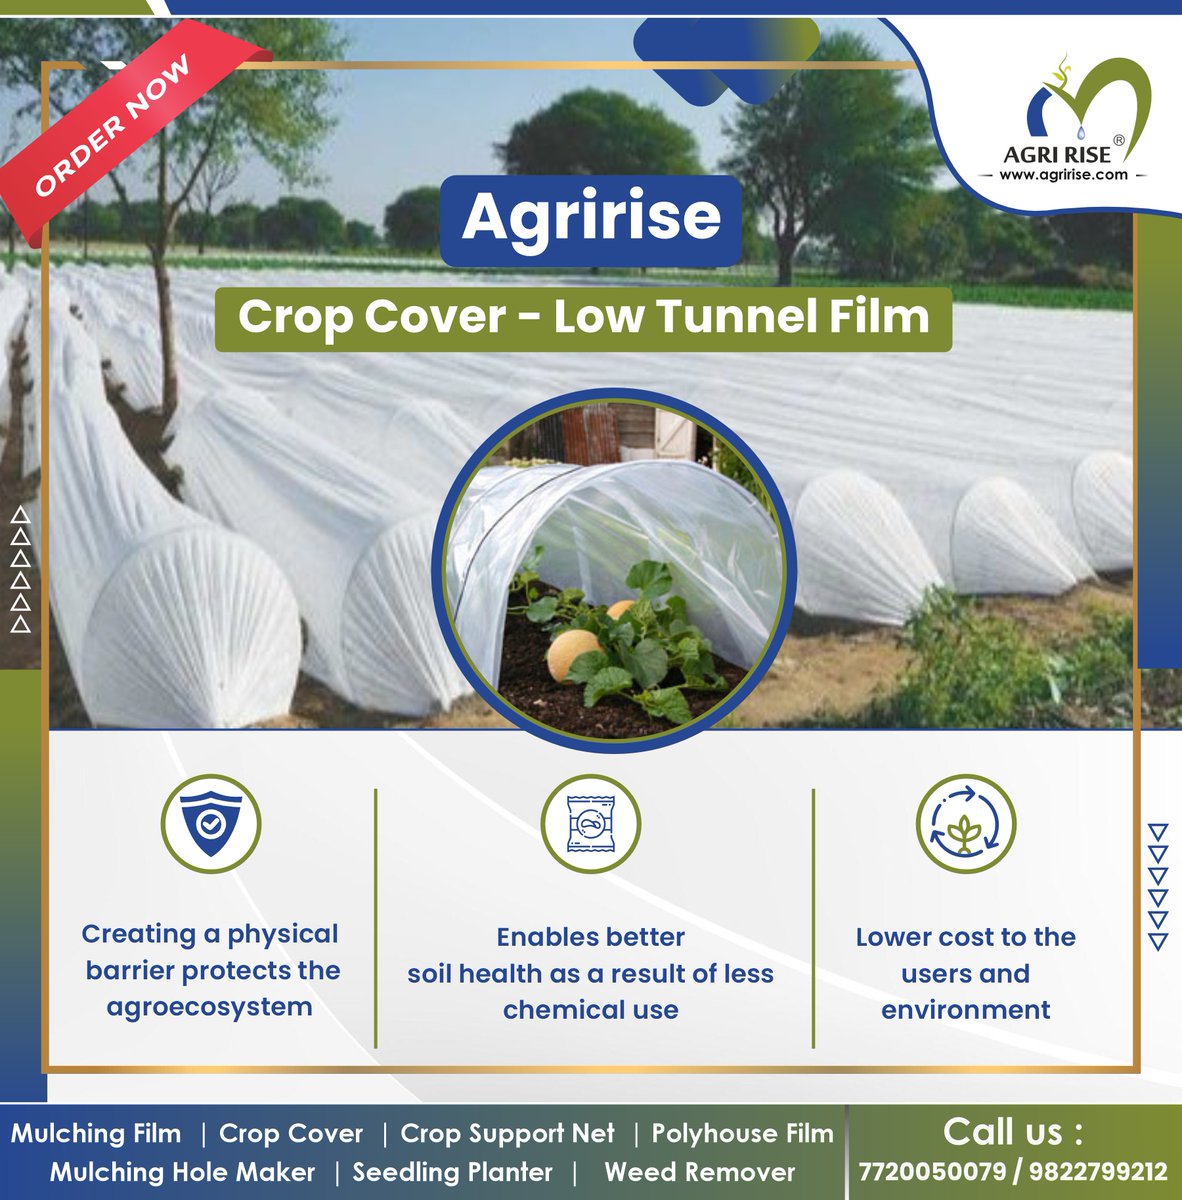 🌱🌿🎥 AgririsemCrop Cover - Low Tunnel Film 🌱🌿🎥 Creating a physical barrier protects the agroecosystem 🛡️ Enables better soil health as a result of less chemical use 🌱💰 Lower cost to the users and environment 💰🌍 Call us: 7720050079/9822799212 ☎️